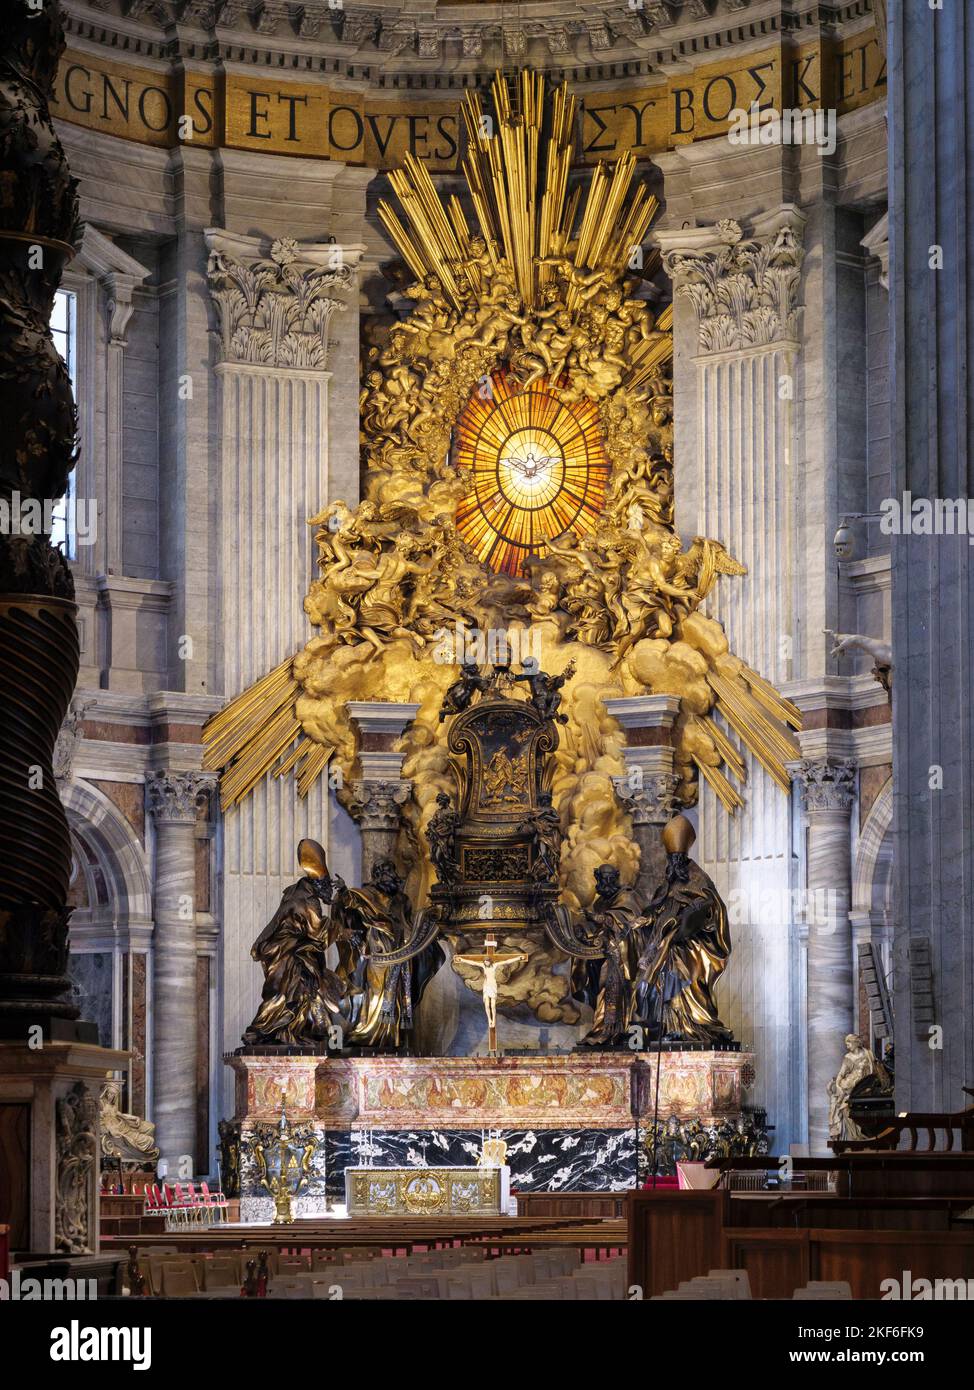 Rome. Italy. Basilica San Pietro (St. Peter’s Basilica). The Cathedra Petri and Gloria (Altar of the Chair of St. Peter) by Bernini, 1666. Stock Photo